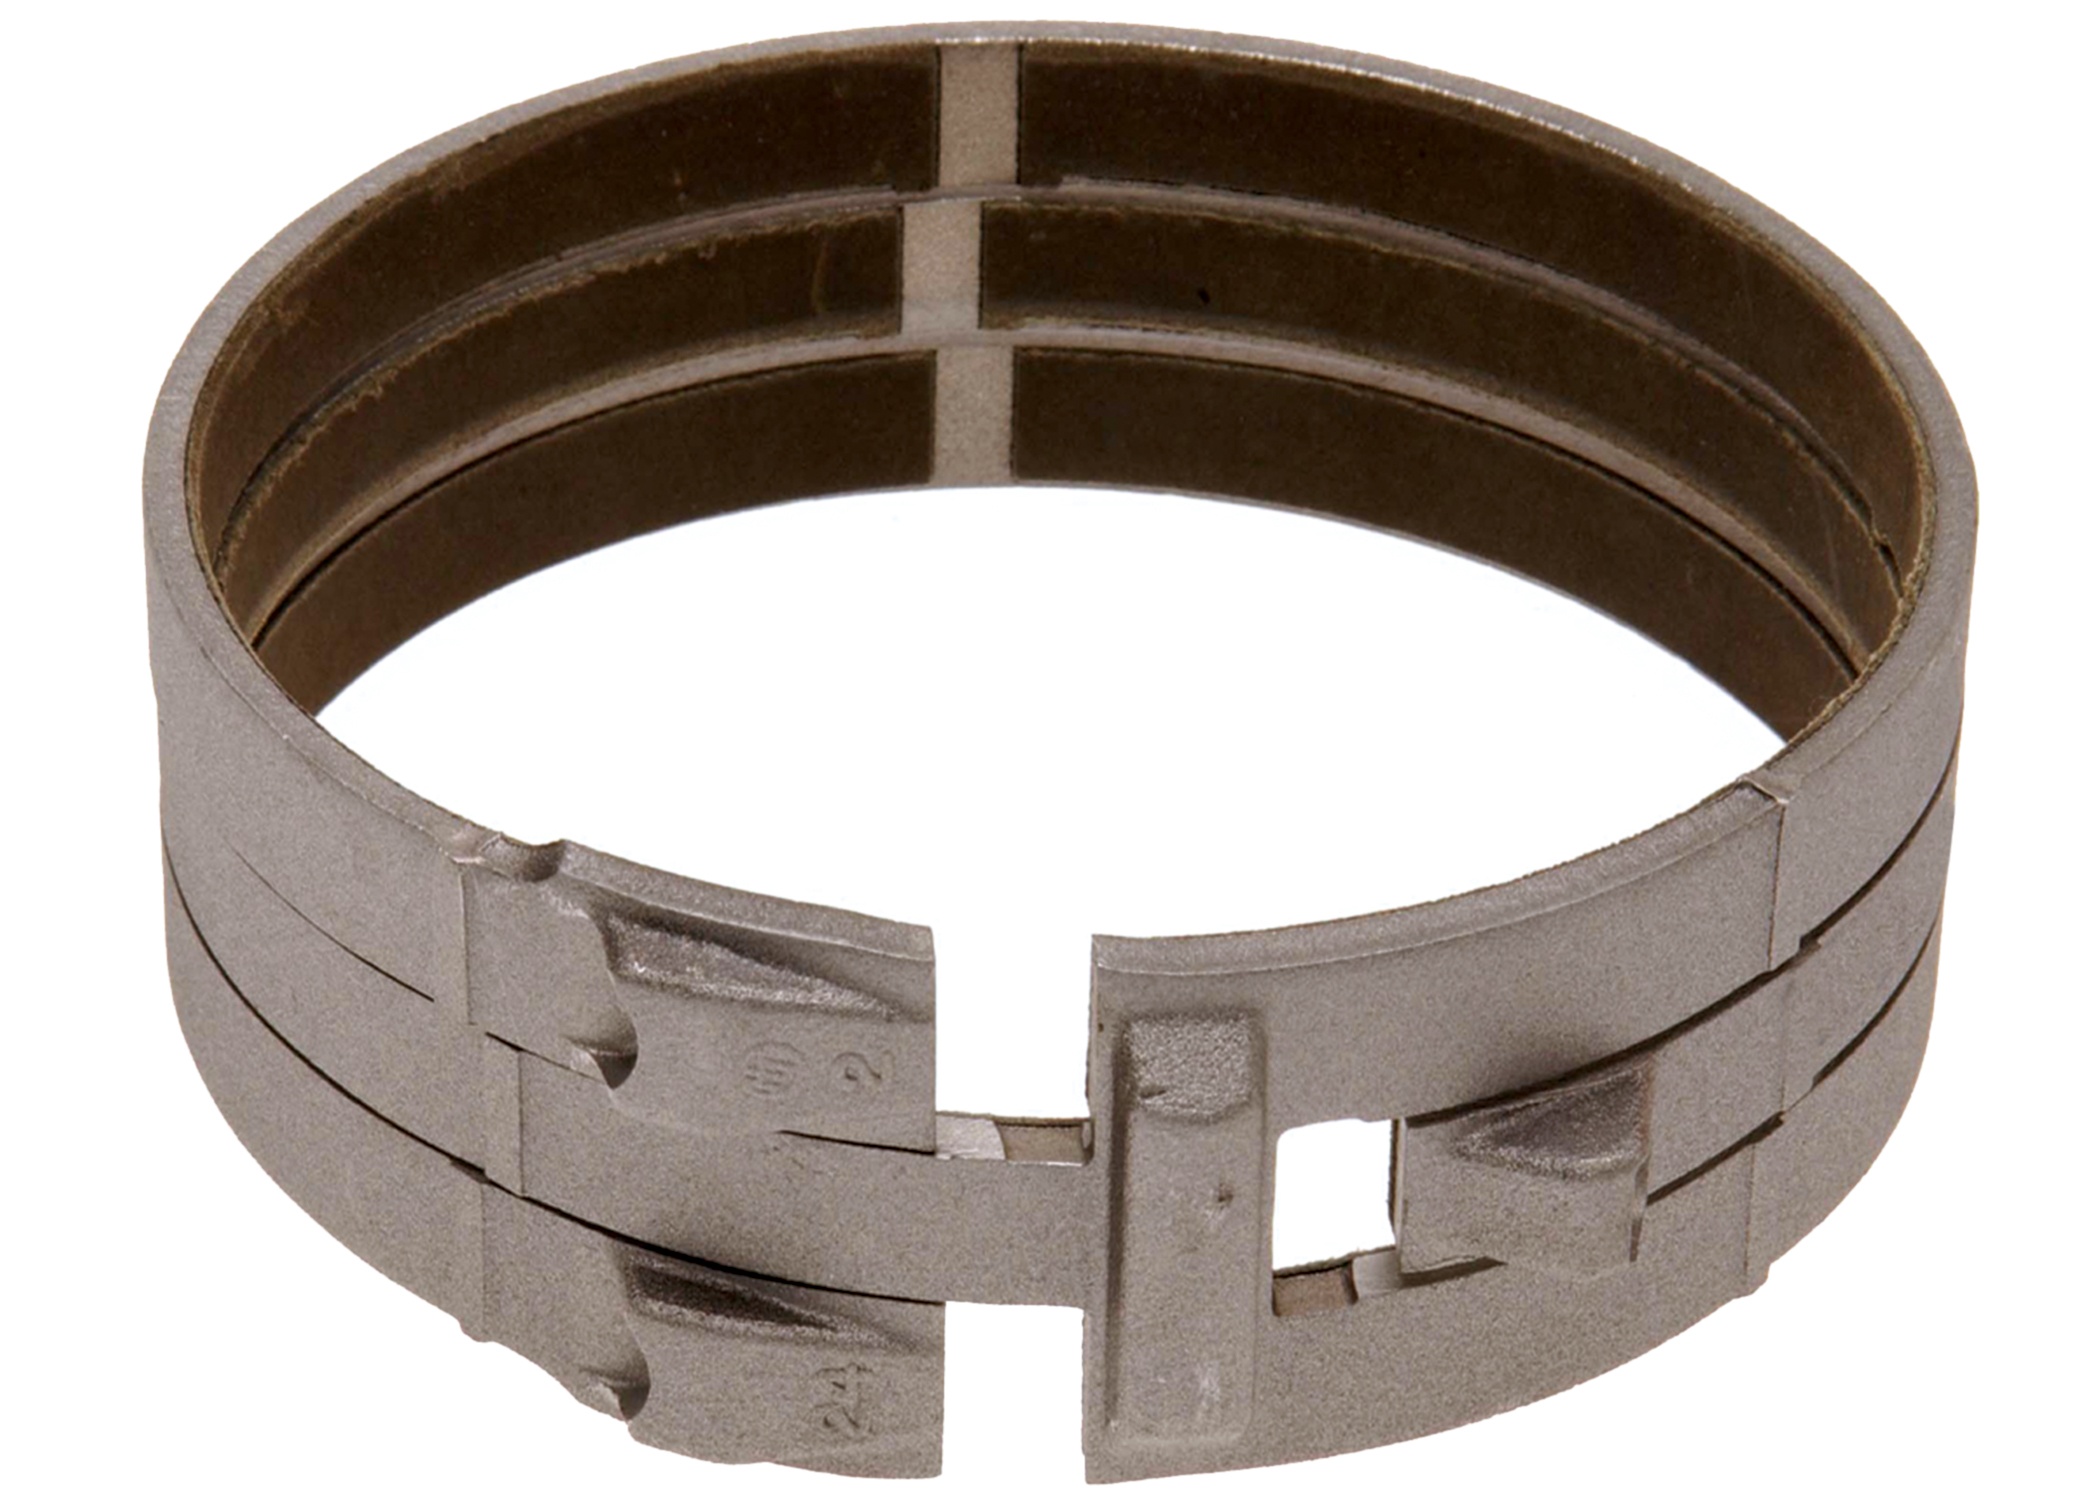 GM GENUINE PARTS - Automatic Transmission Band - GMP 24202229